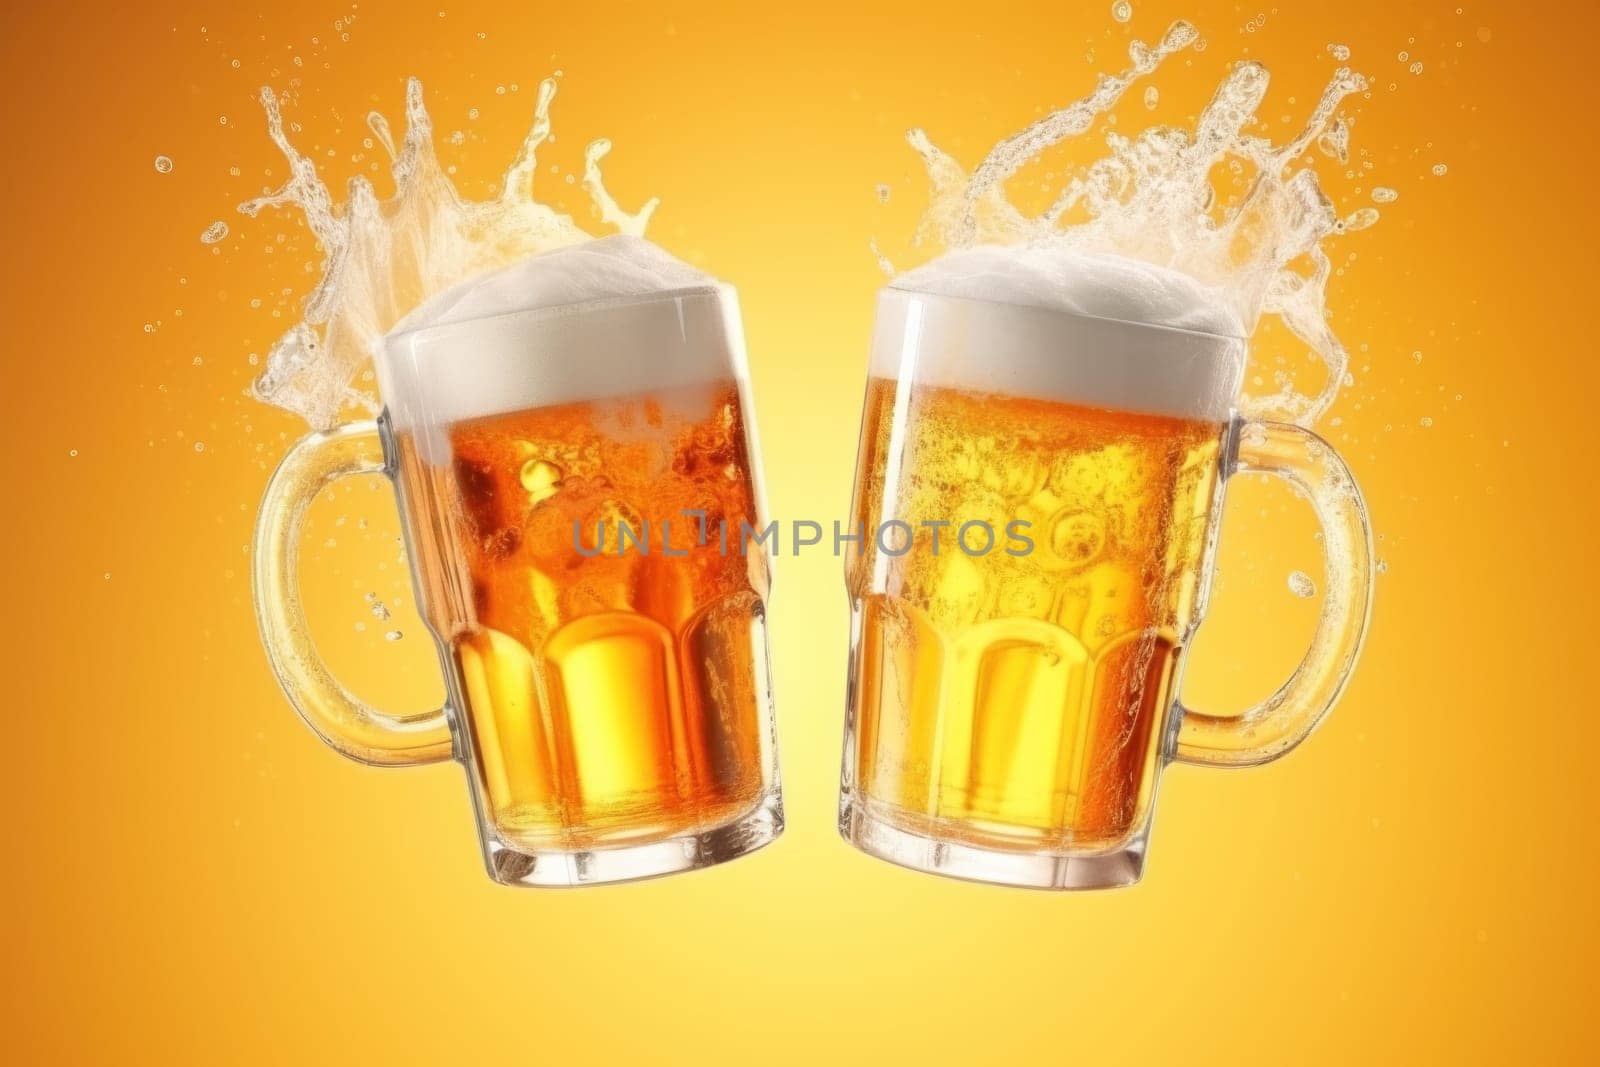 Two glasses of beer are shown in the air, with foam and bubbles. Concept of celebration and enjoyment, as if the two glasses are toasting to a special occasion